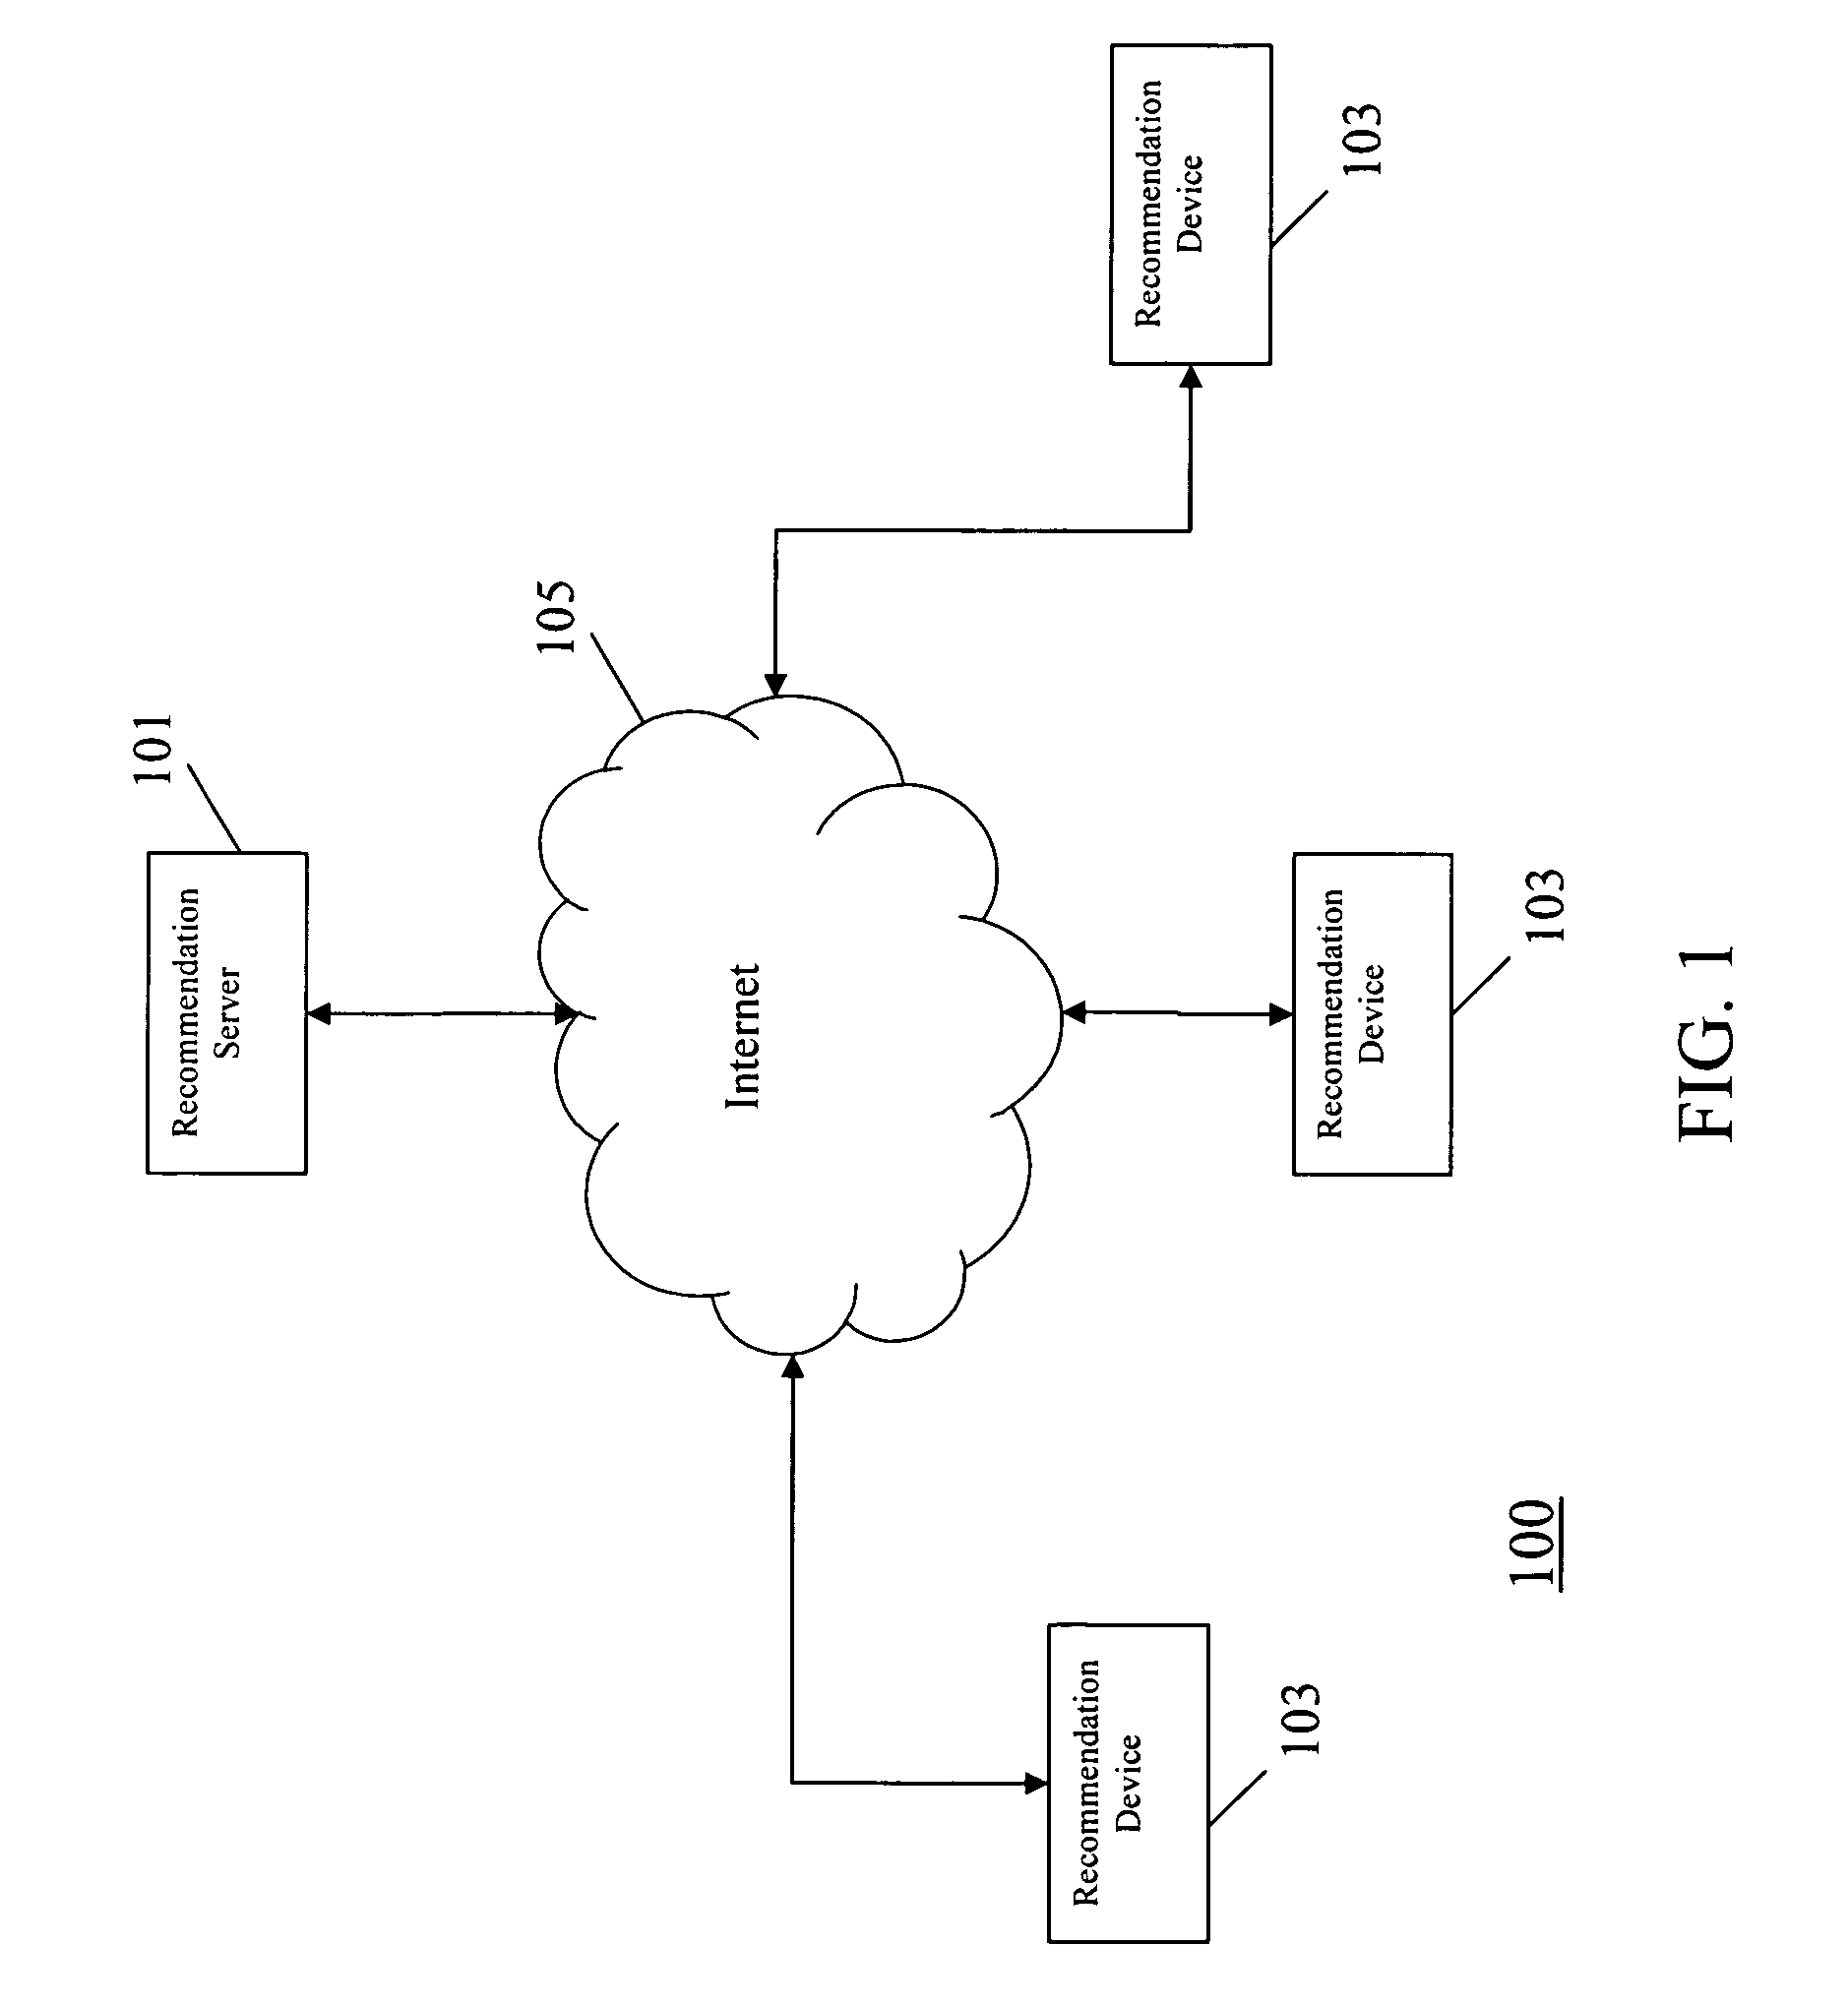 Distributed content item recommendation system and method of operation therefor